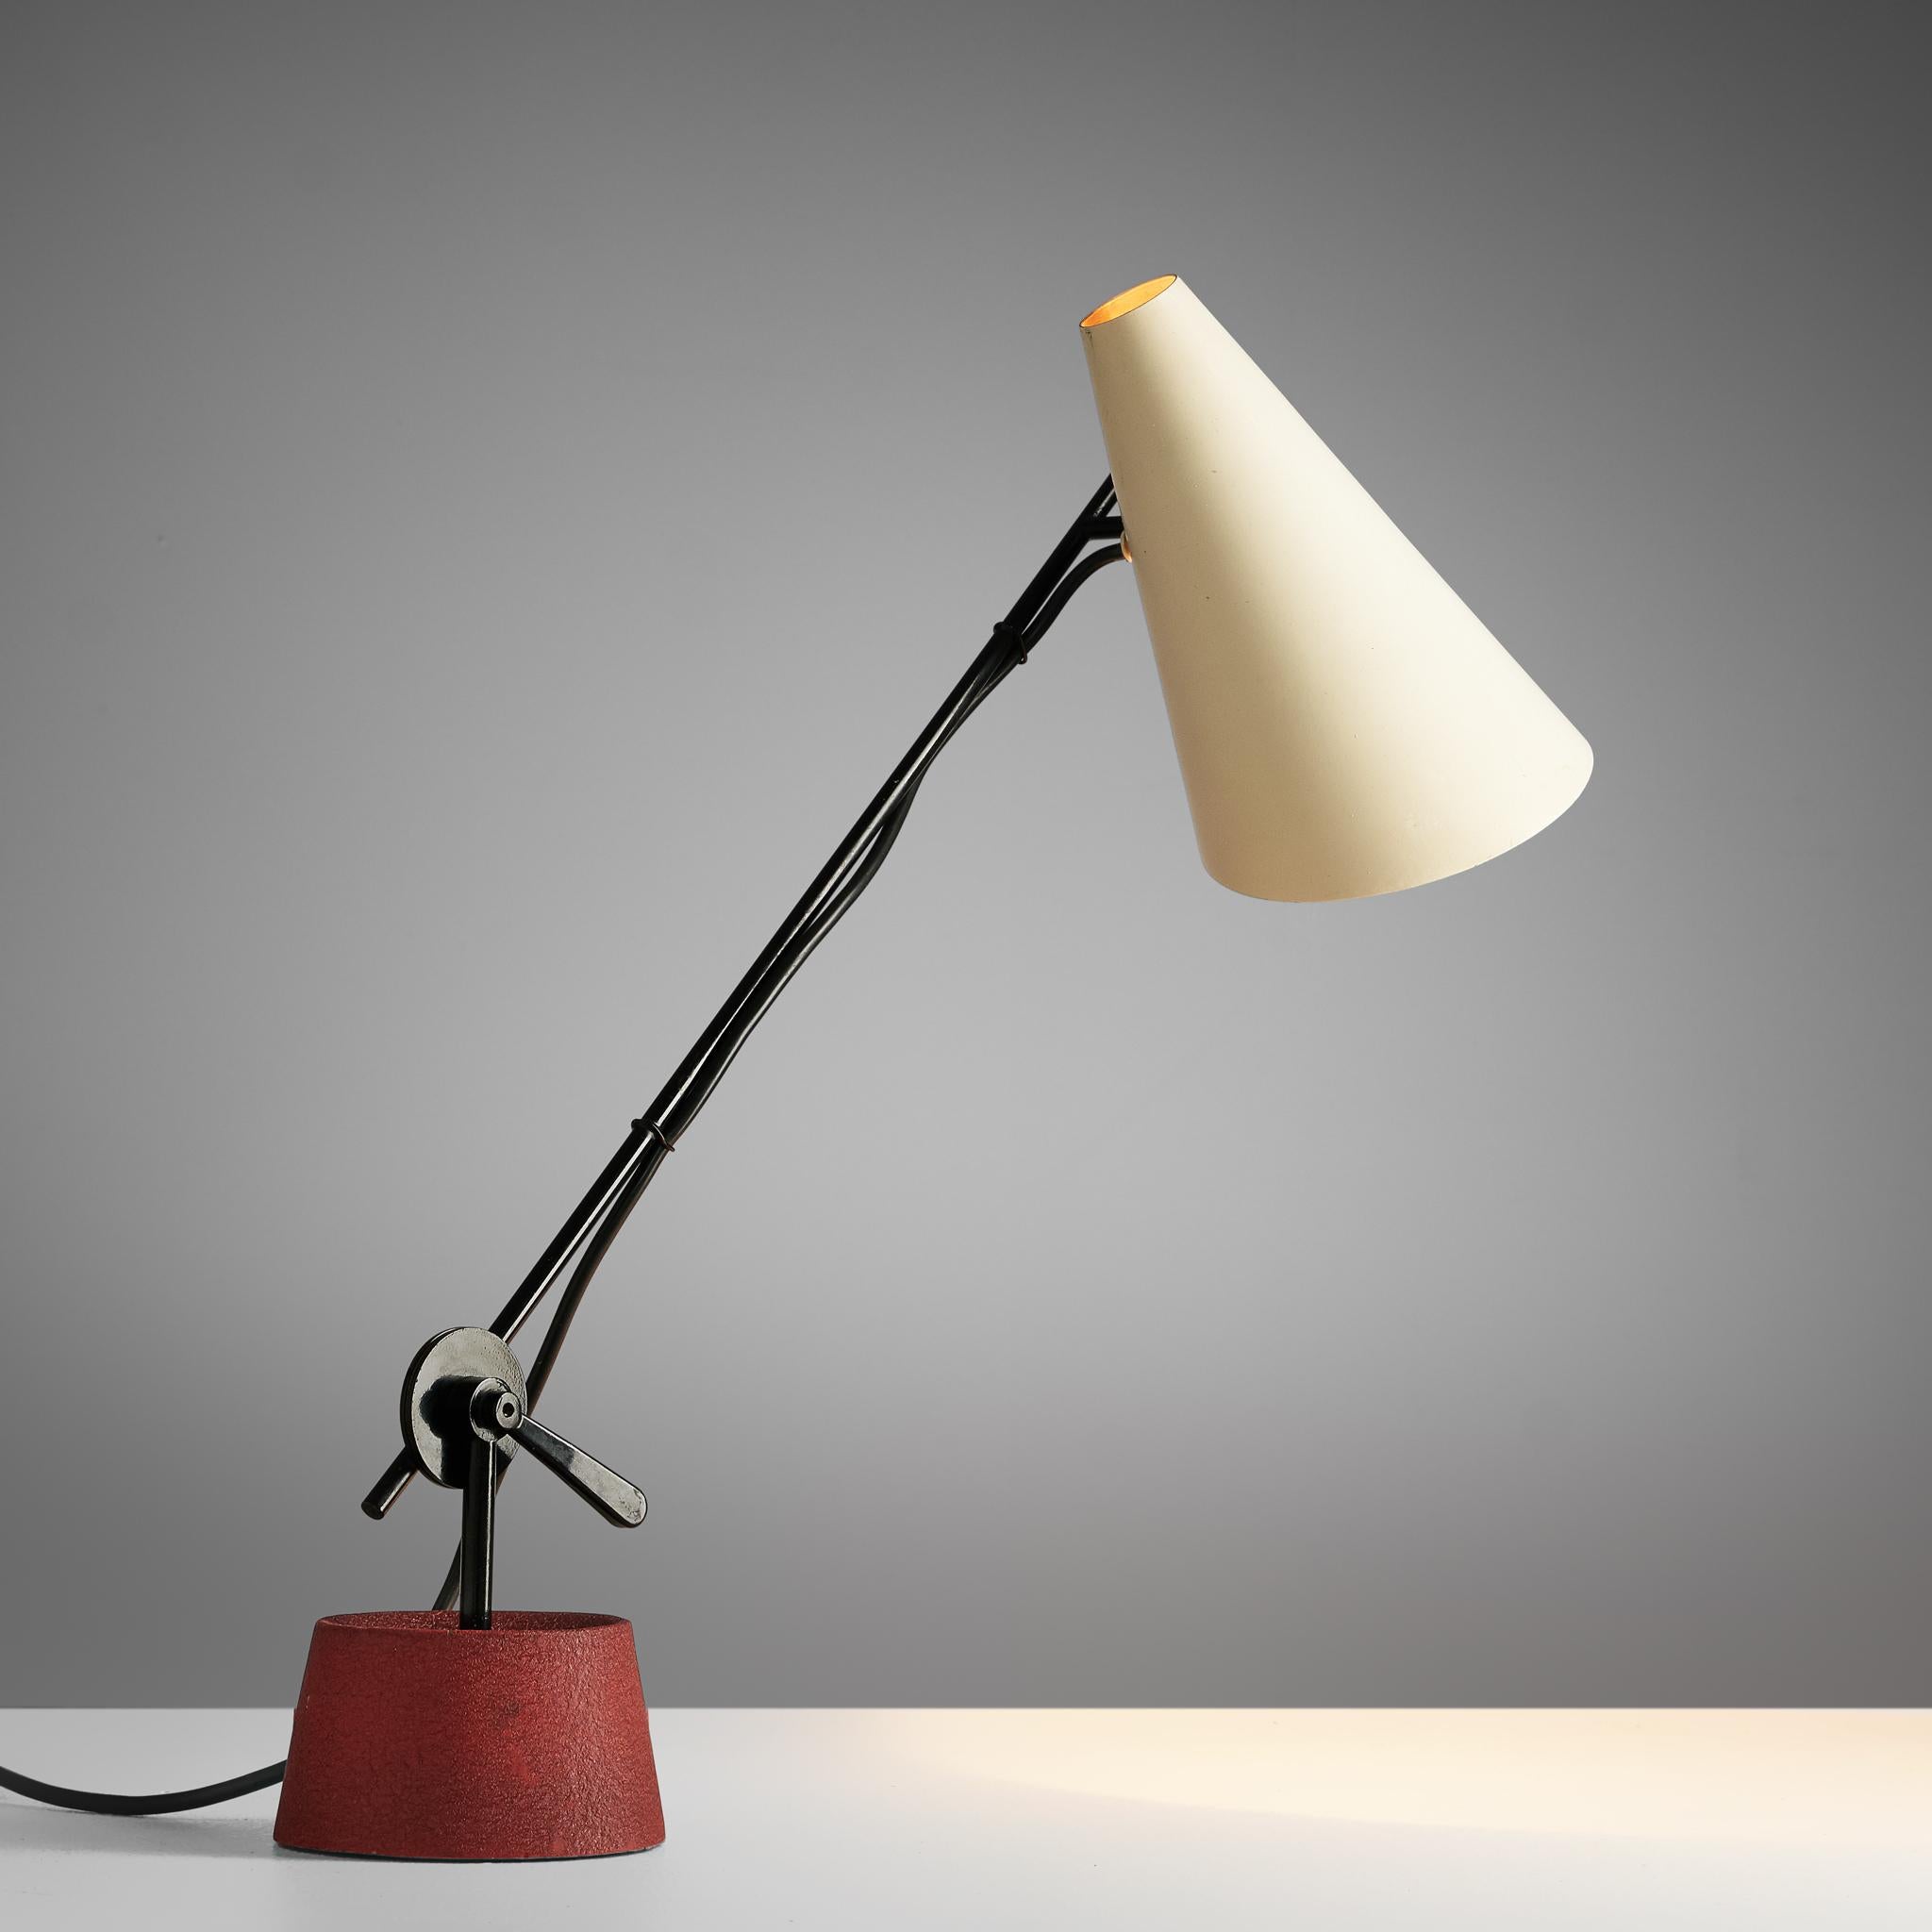 Bünte & Remmler, table light, iron, aluminum, Austria, 1950s.

Made by Bünte & Remmler, this desk lamp features a red, circular iron base, upon which a black iron stem is mounted, adjustable in angle. The cone-shaped shade in off-white is affixed to